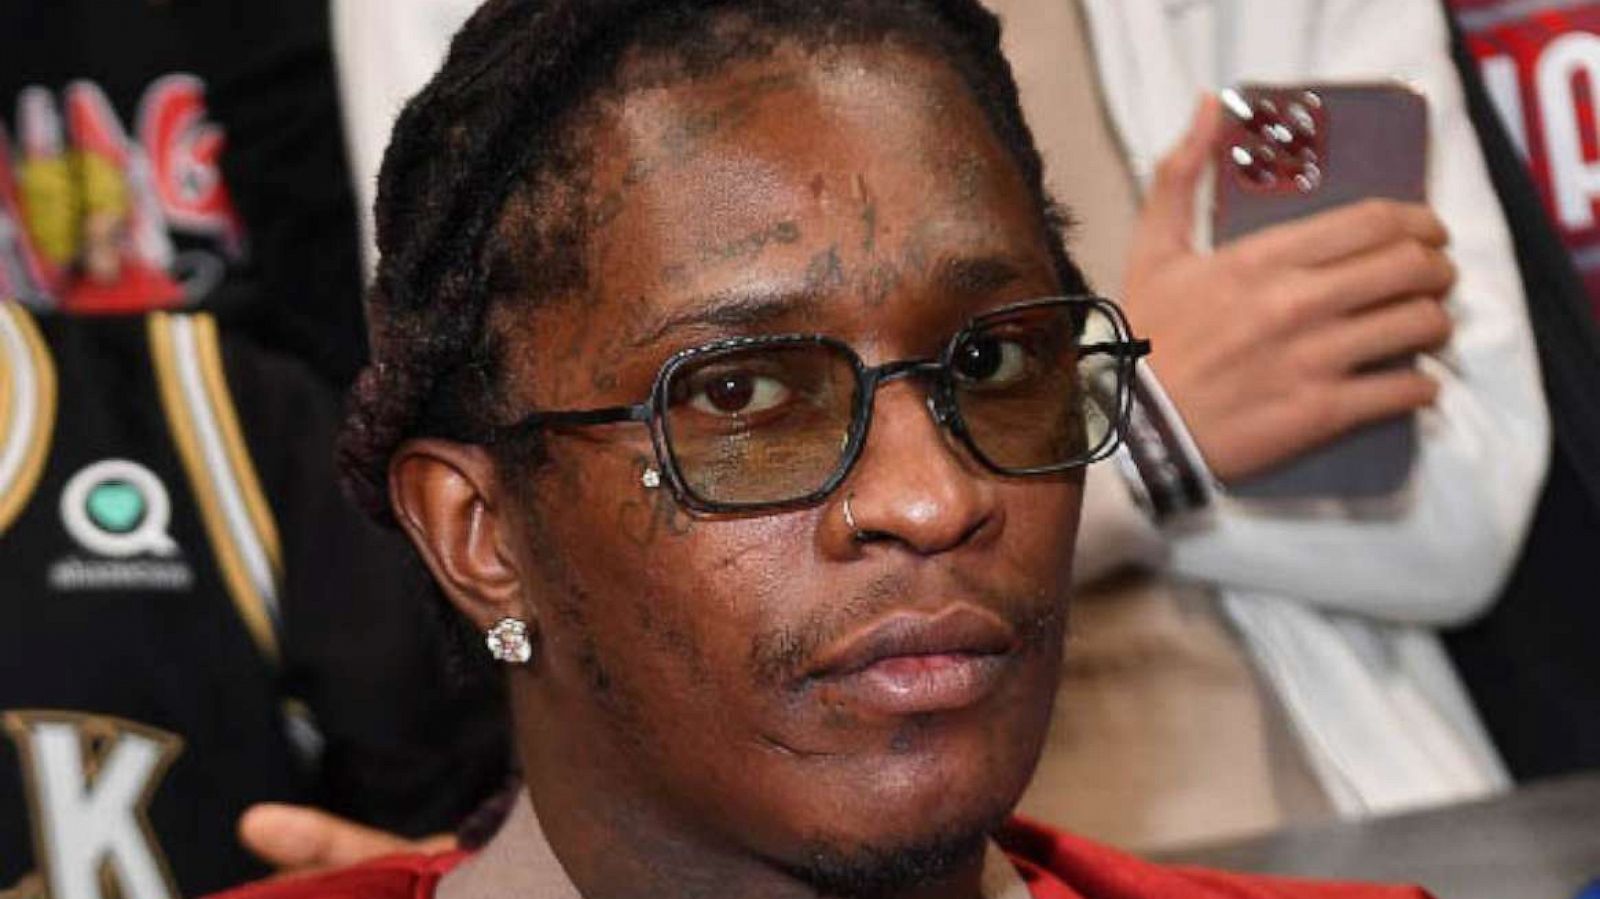 AEG PRESENTS LAWSUIT FOR $6 MILLION AGAINST YOUNG THUG AS RICO CASE OPENING